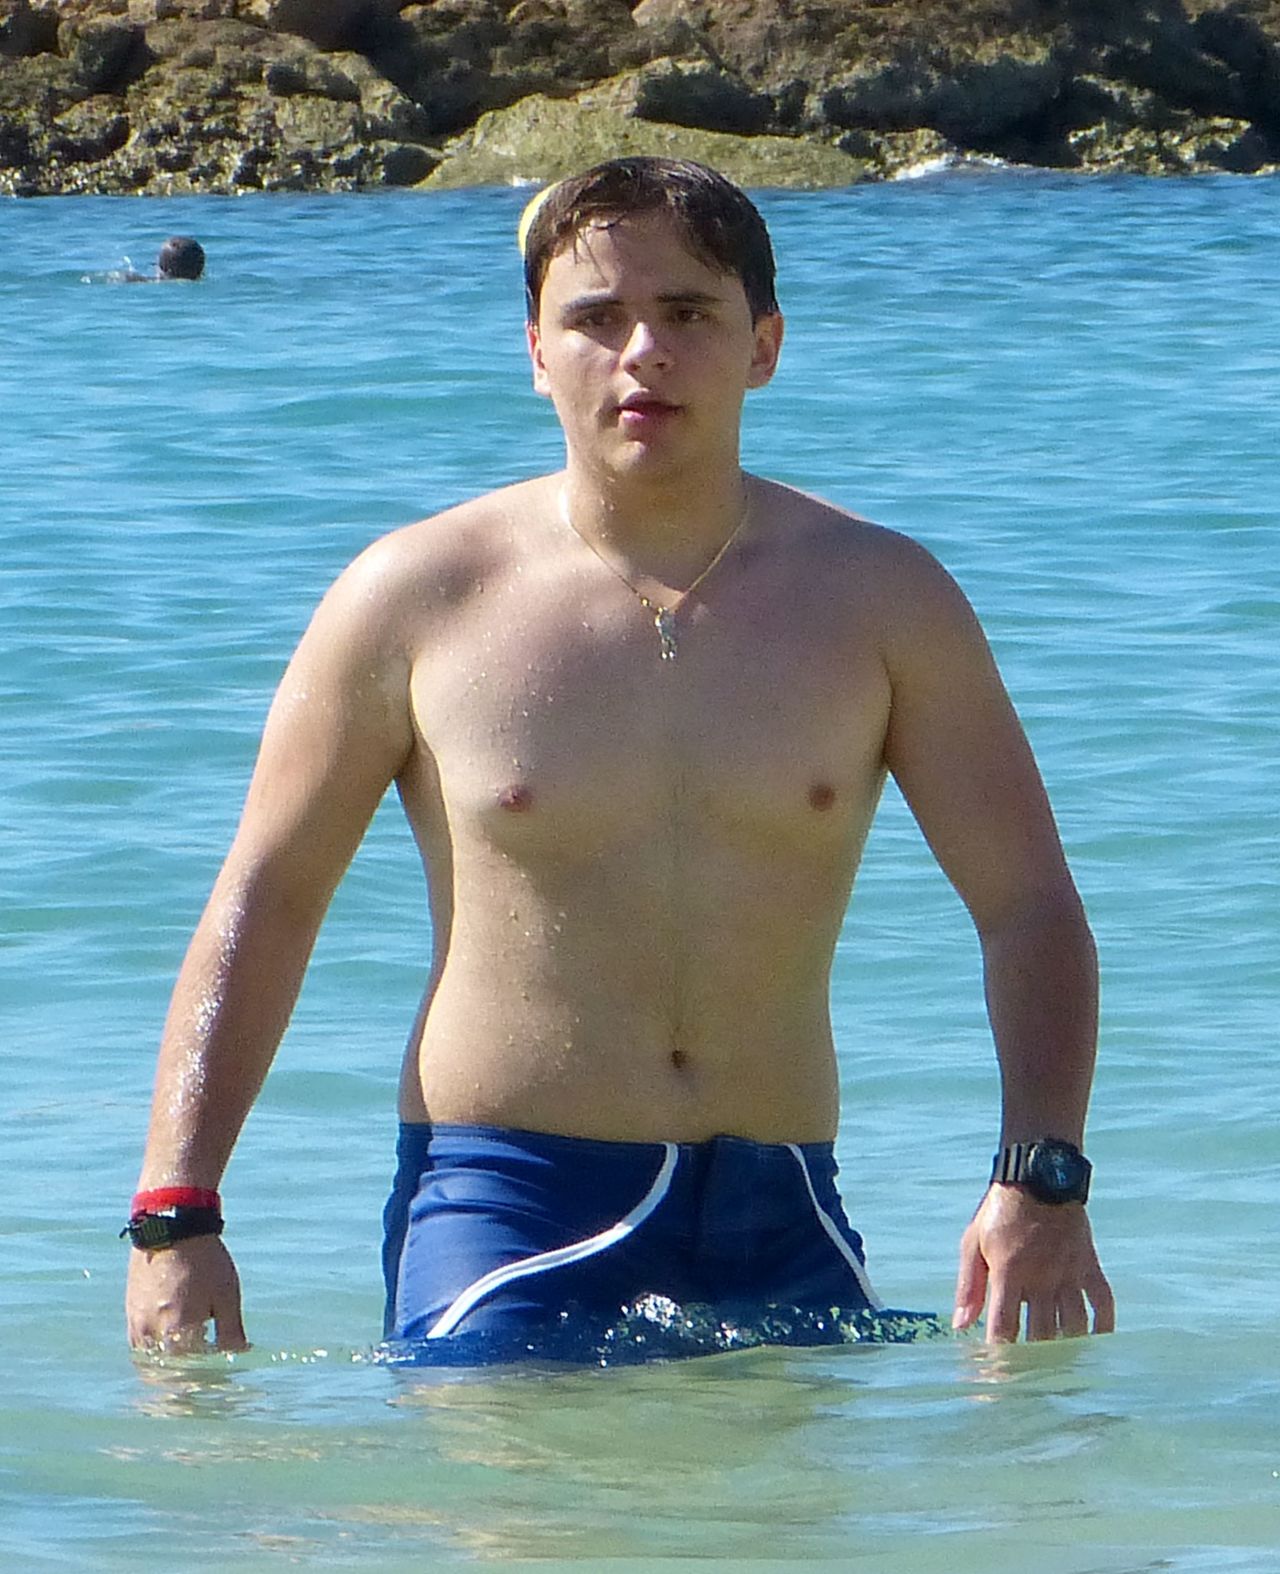 Prince Jackson goes for a dip in Hawaii over Christmas 2013.